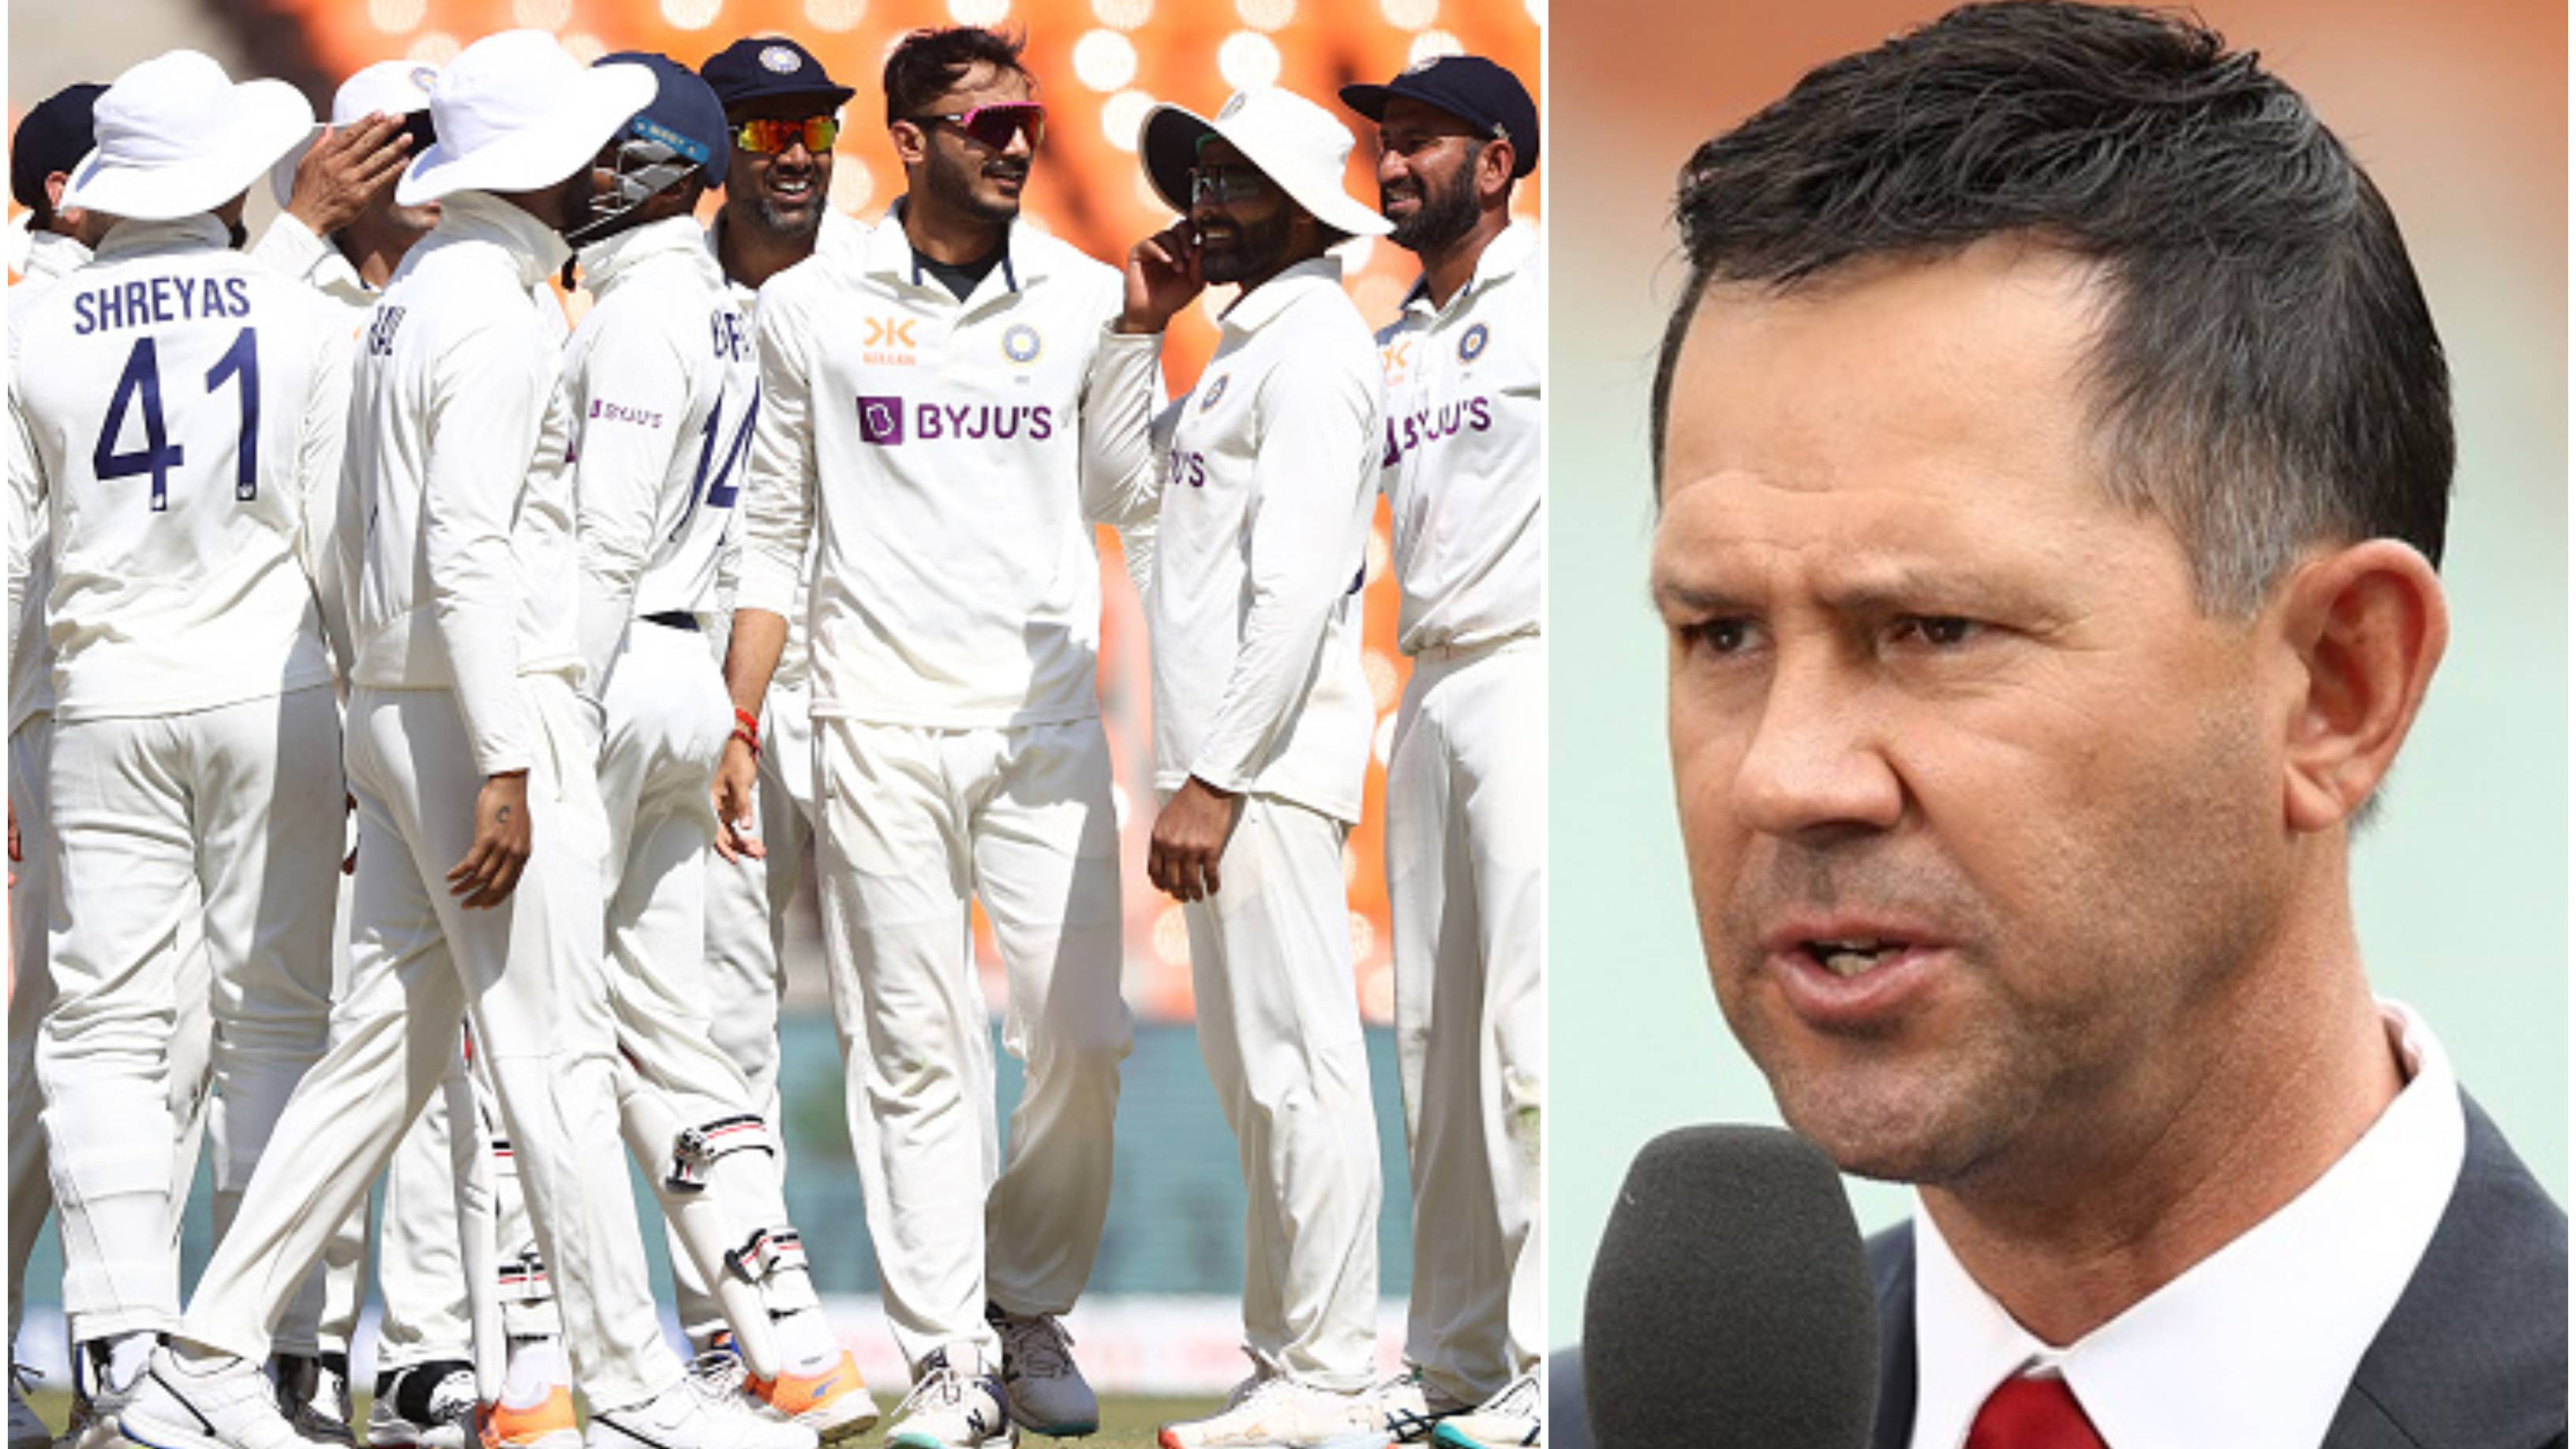 Ricky Ponting names his X-factor selection for Team India ahead of WTC final against Australia